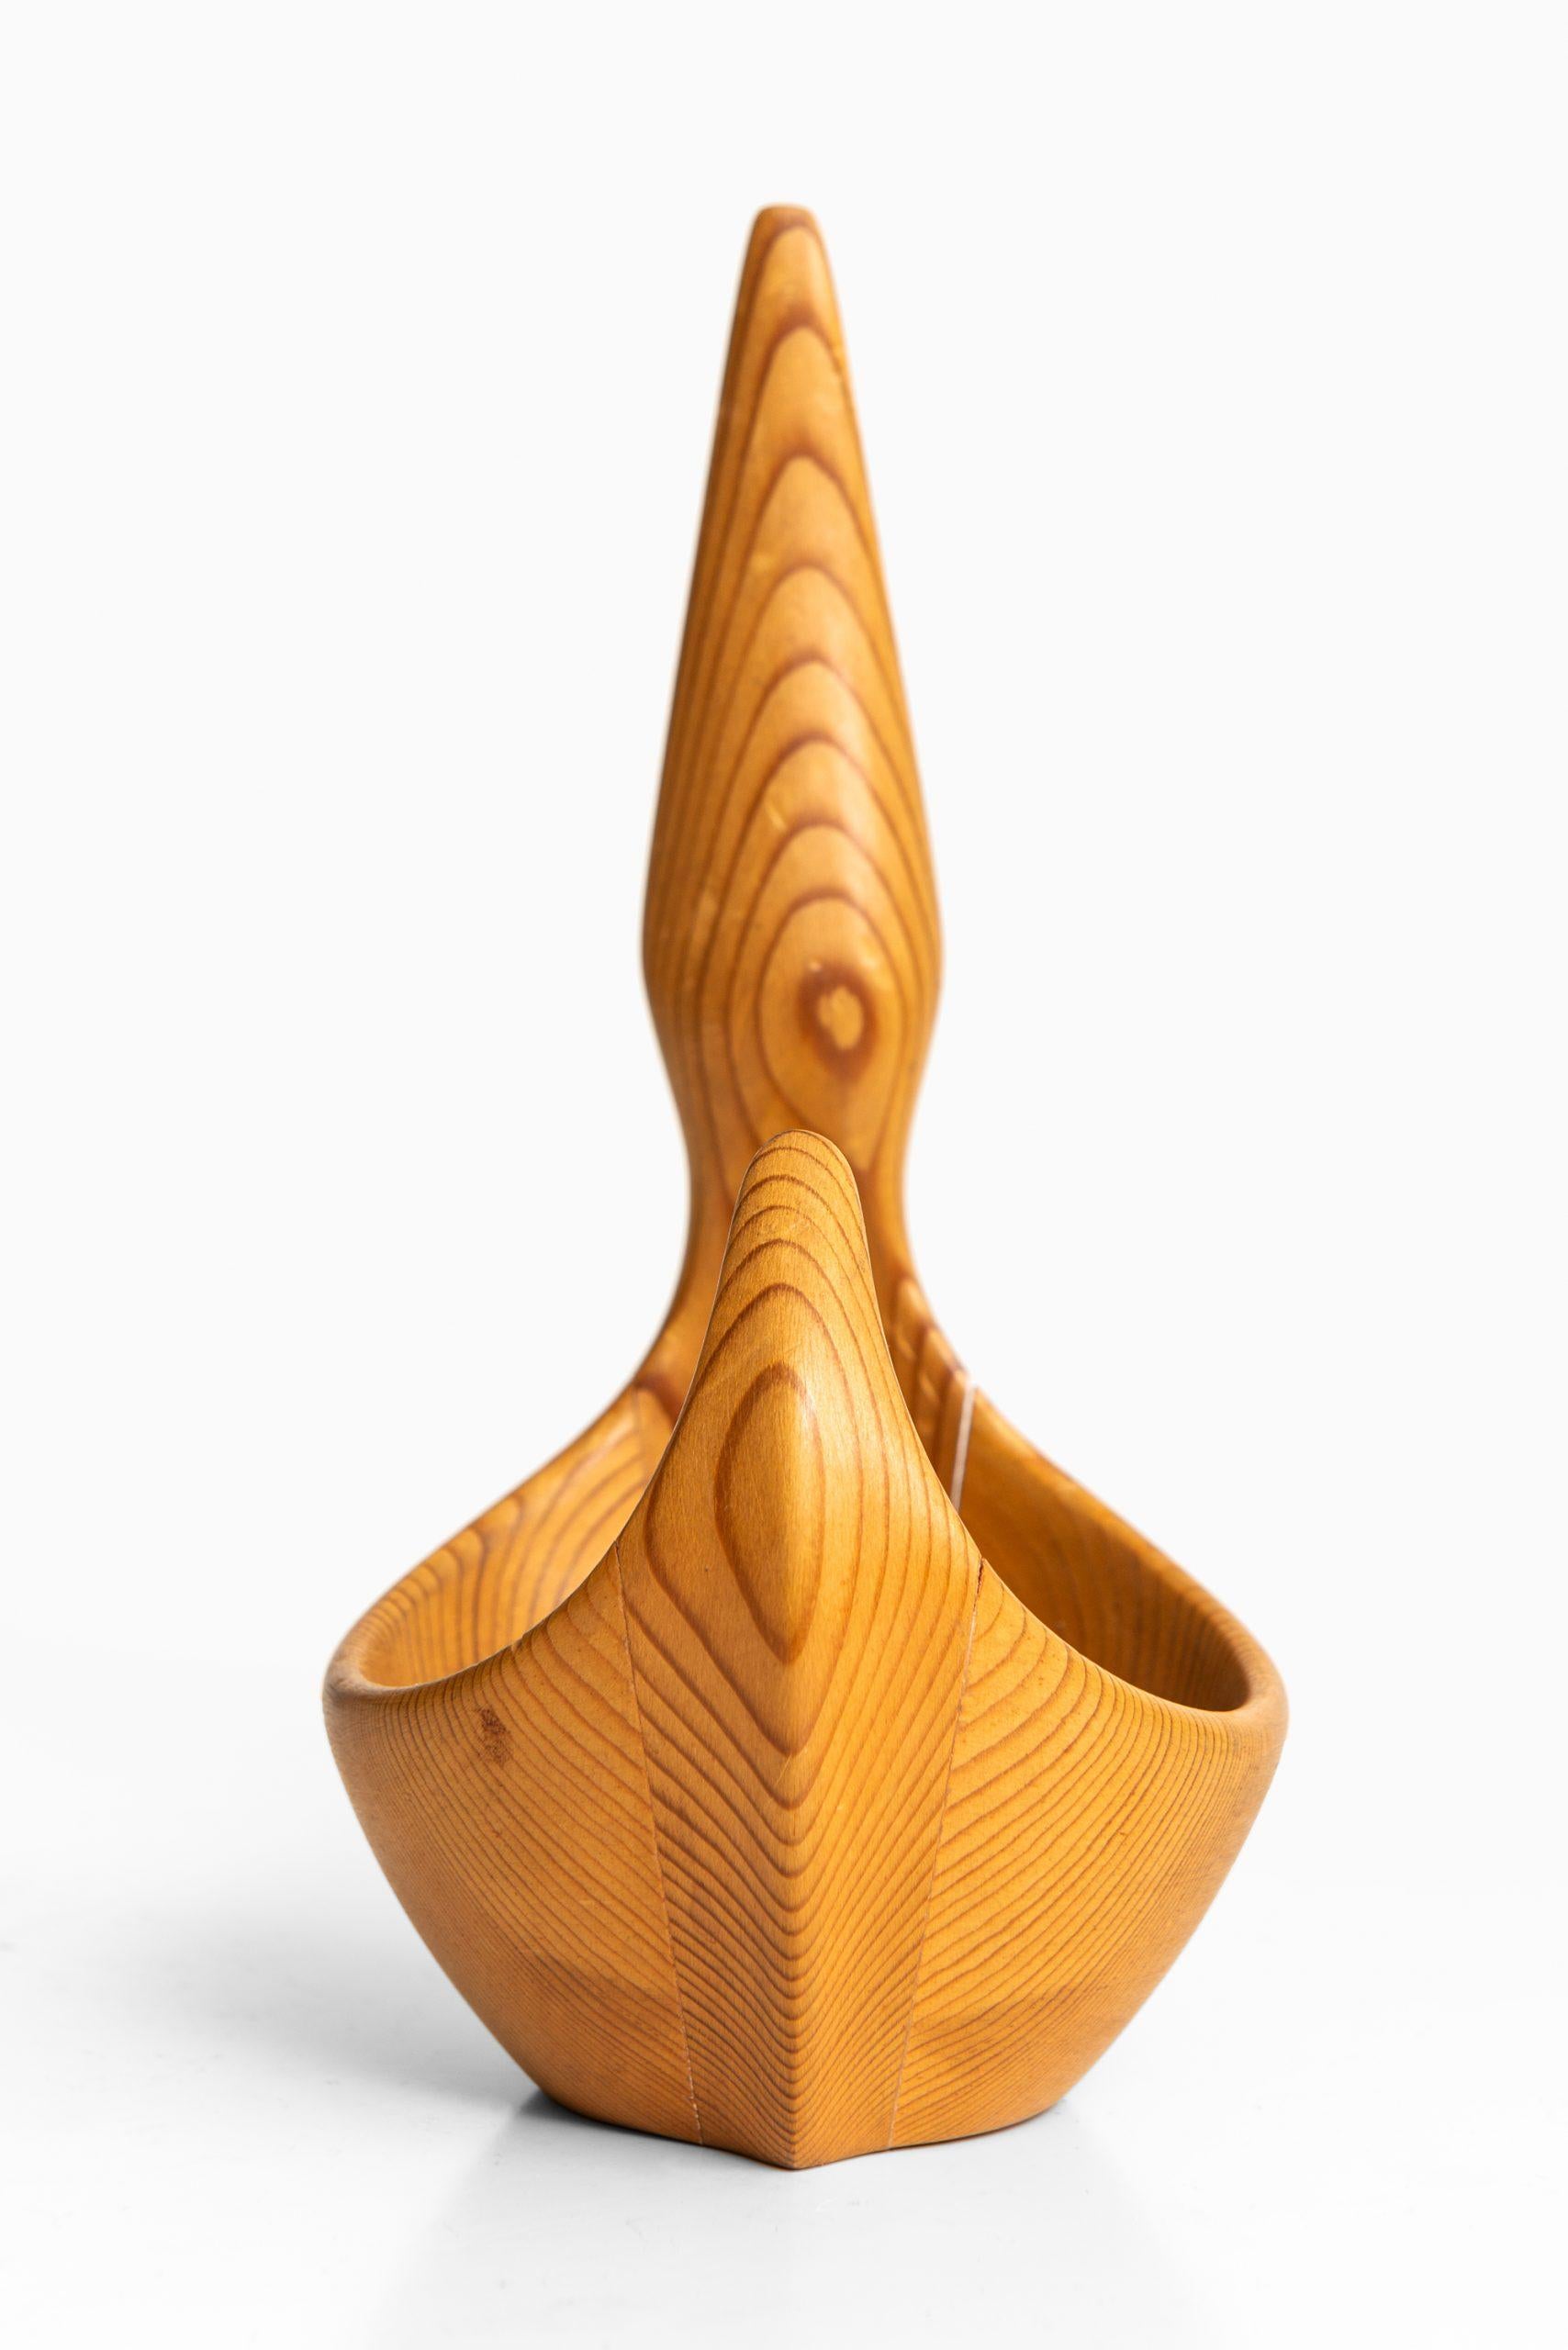 Sculpture / bowl designed by Johnny Mattsson. Produced by Johnny Mattsson in Sweden.